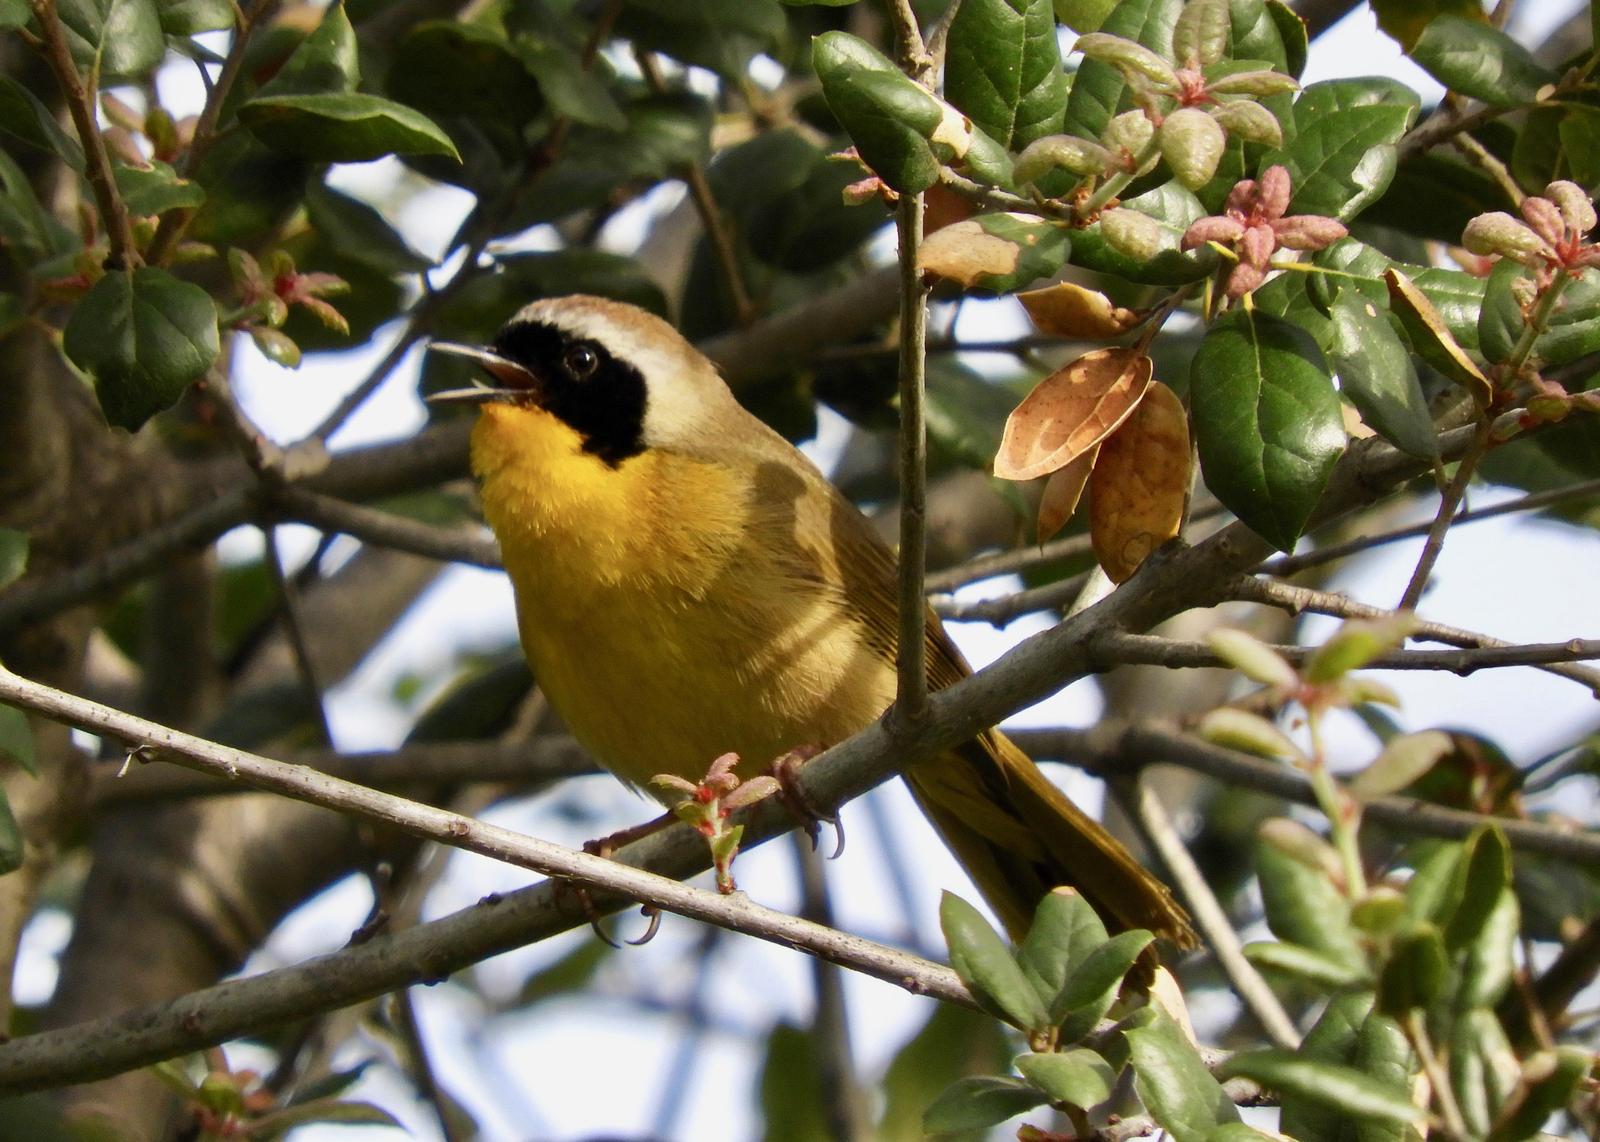 Common Yellowthroat Photo by Yvonne Burch-Hartley